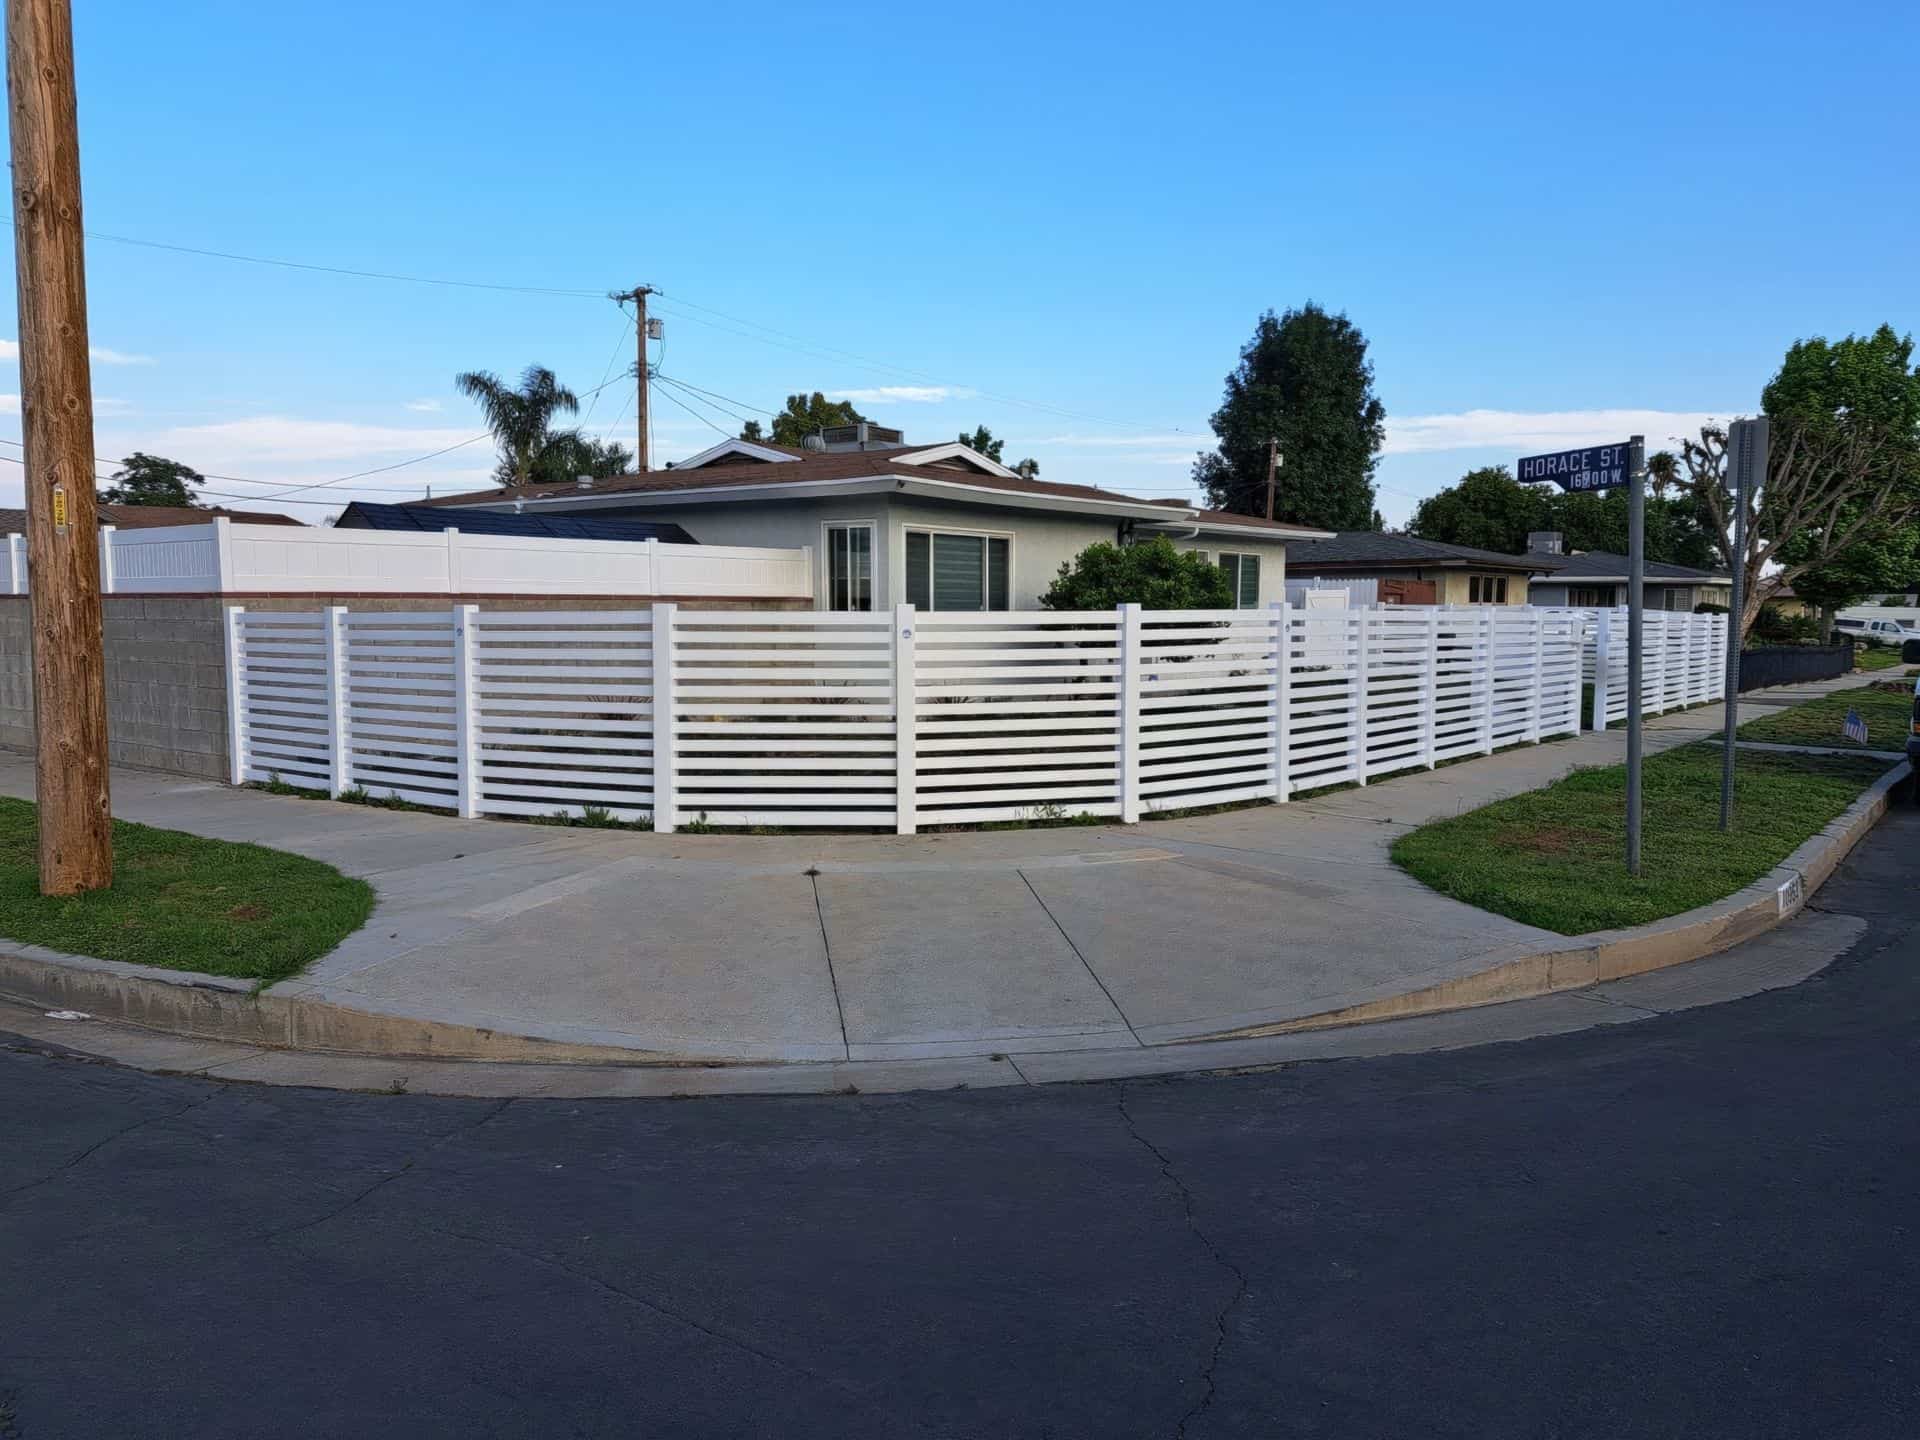 Vinyl horizontal picket fence & suburban home with concrete sidewalk, lush lawn, & trees in the background.